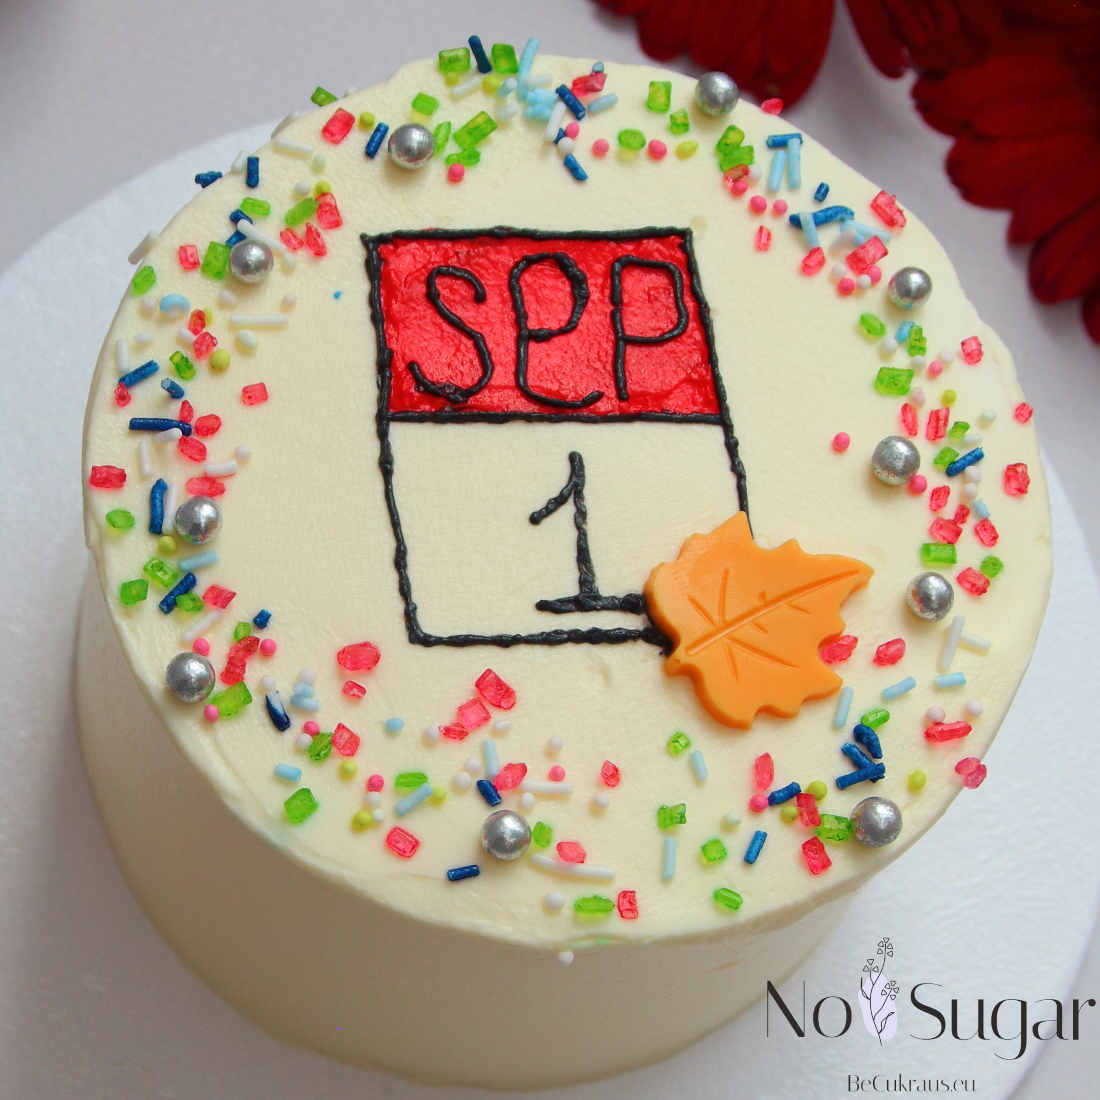 Bento cake for 1 September – Knowledge Day